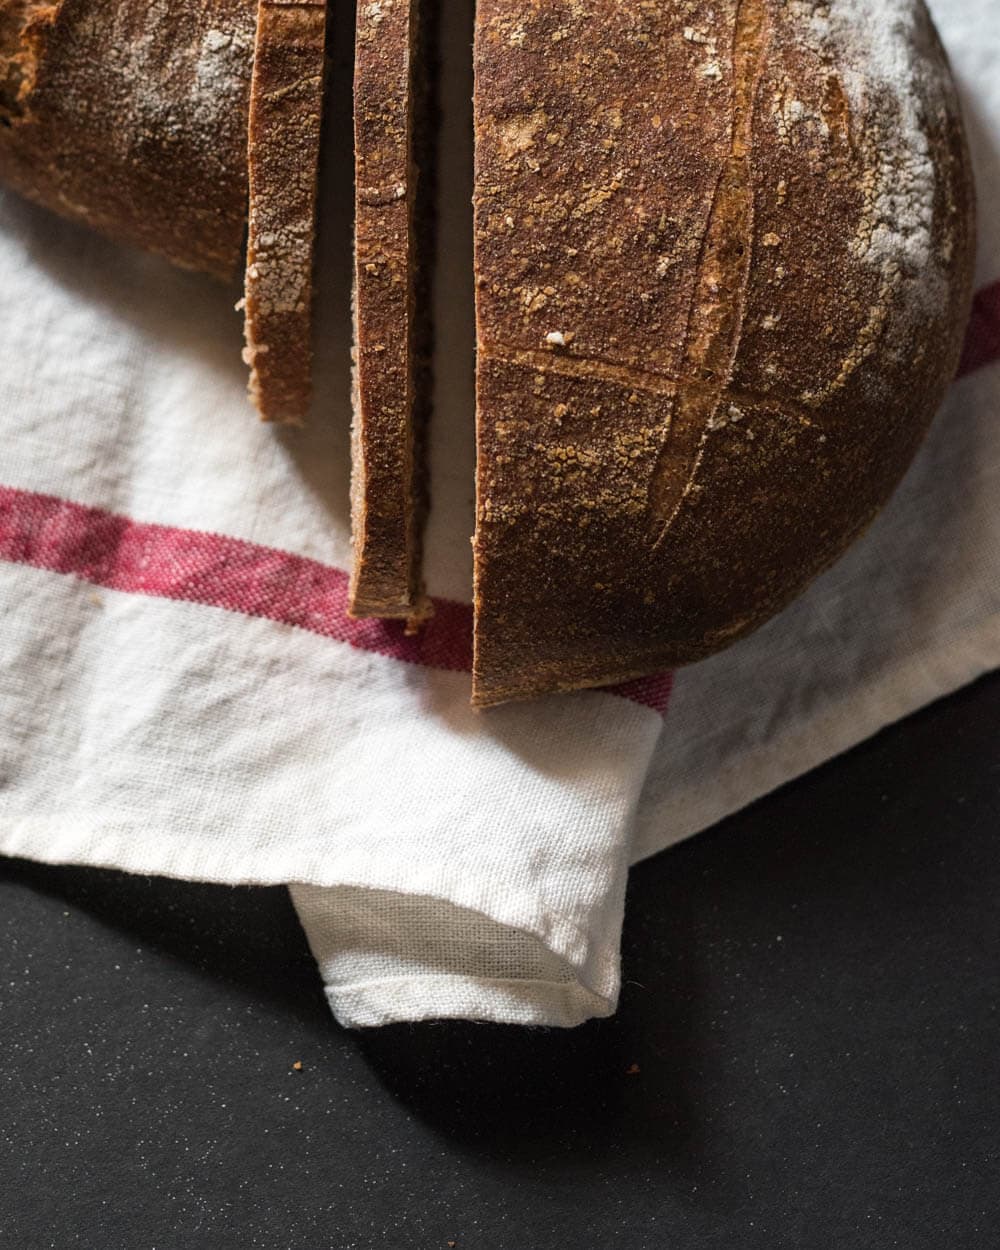 100% Whole Wheat Sourdough | The Perfect Loaf